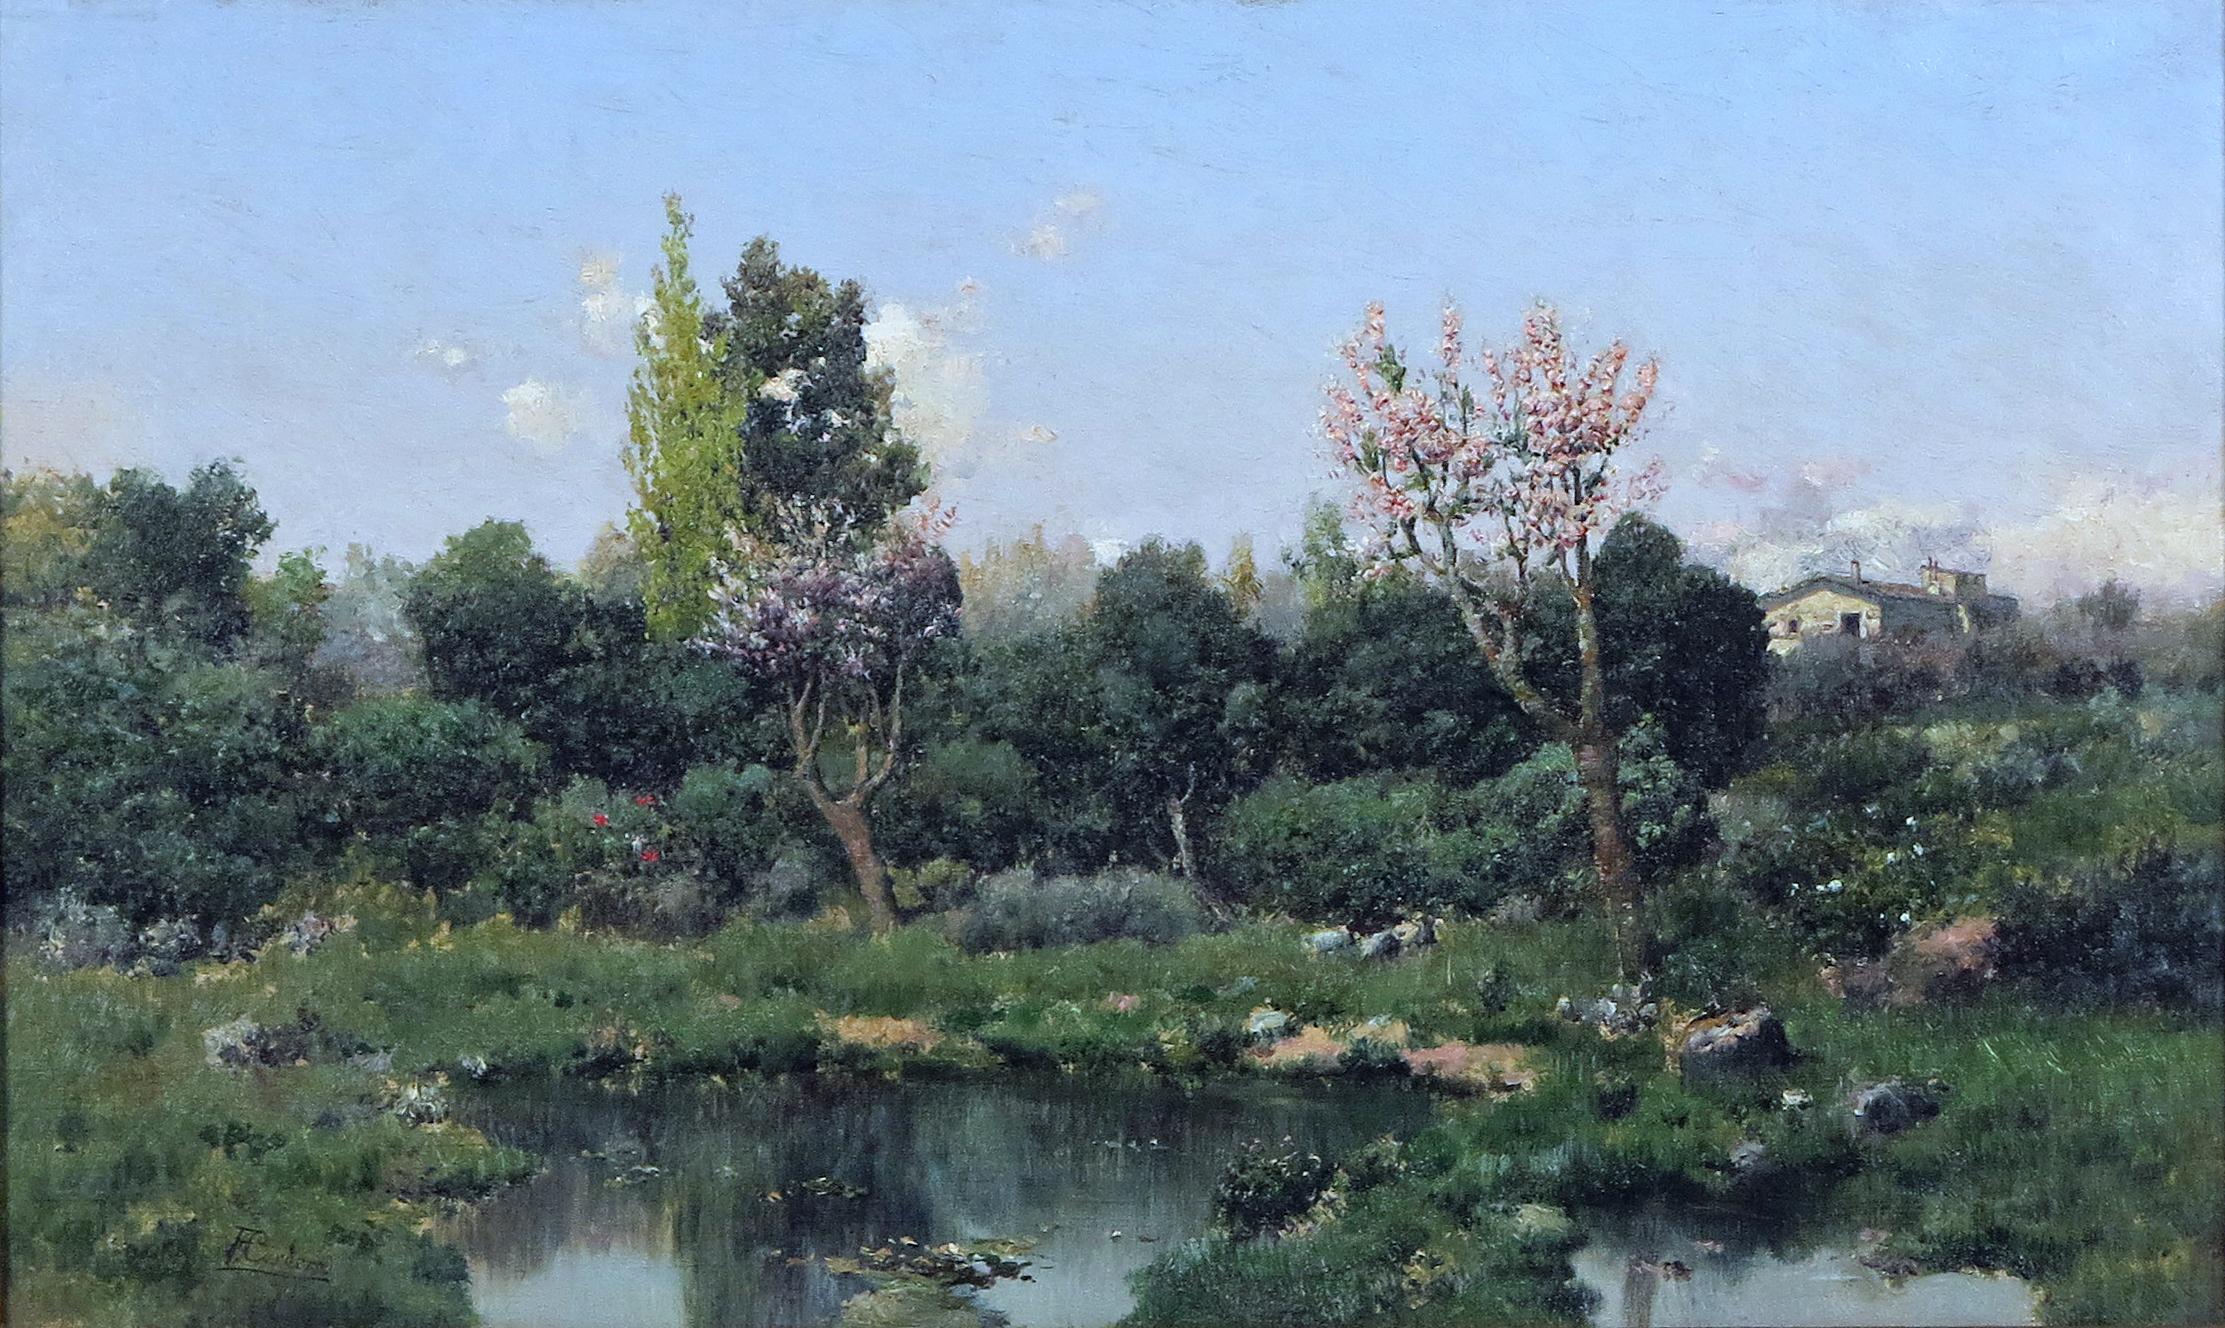 José Franco Cordero  Landscape Painting - Landscape with Flowering Trees and Pond